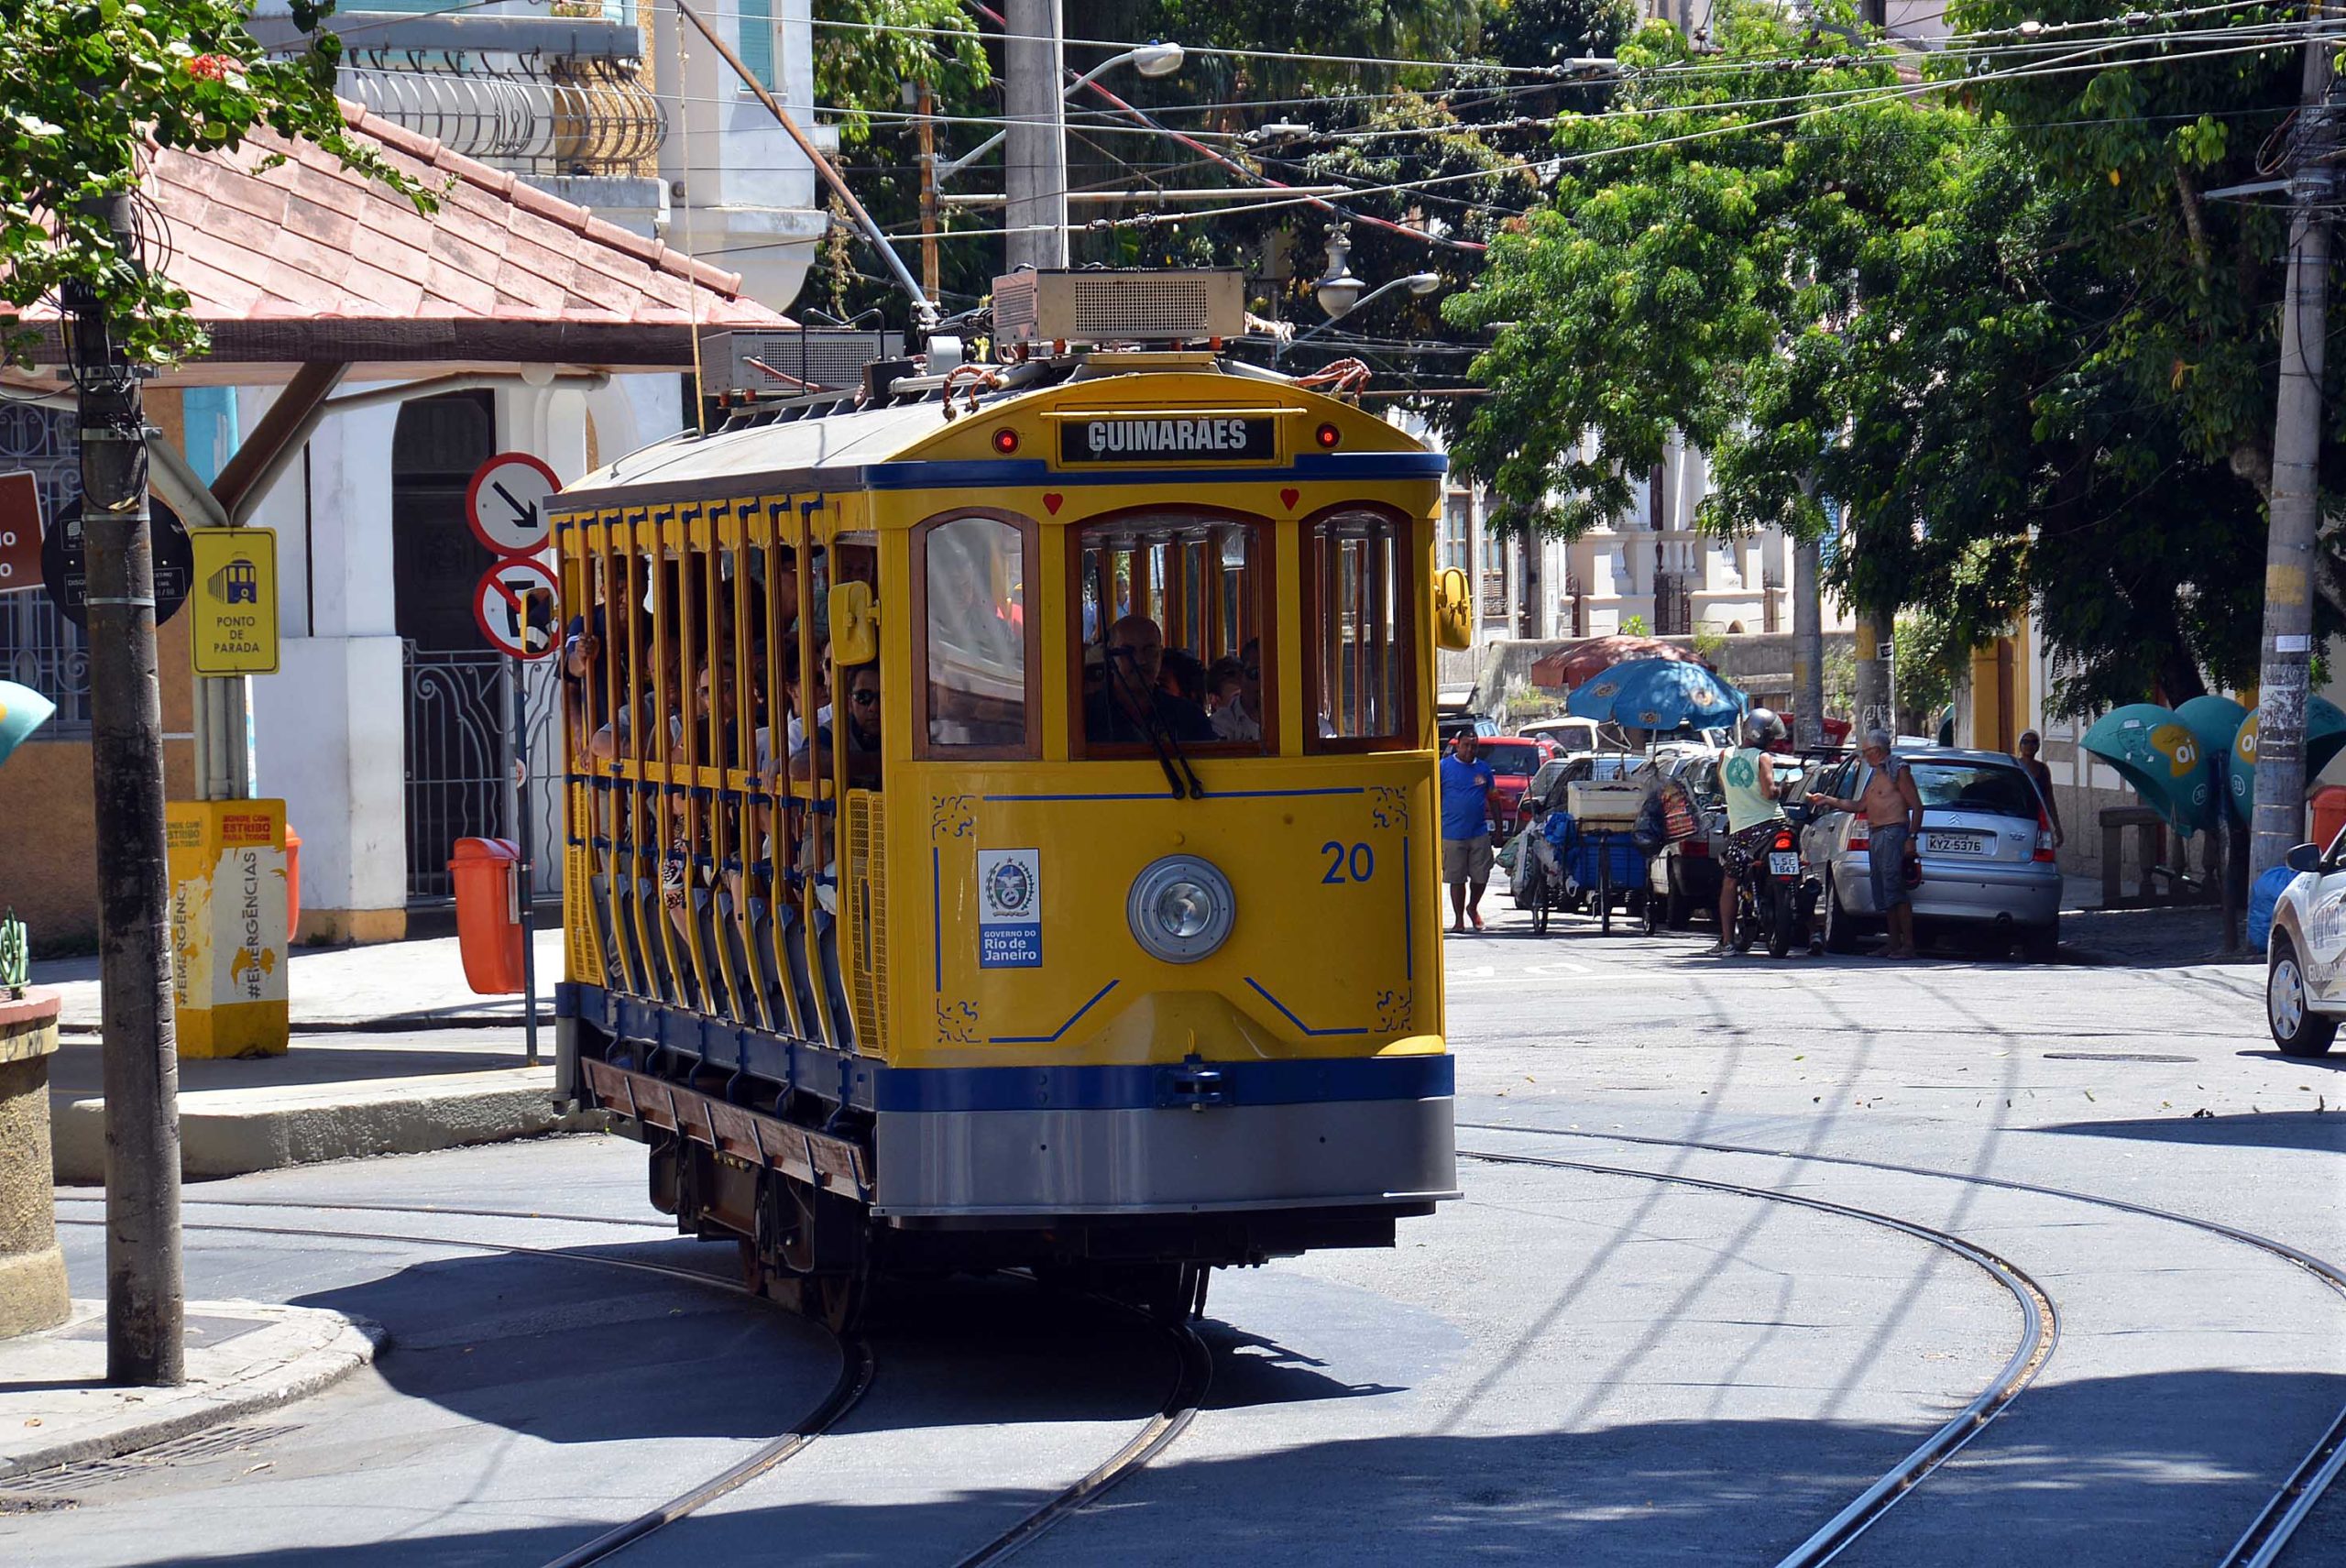 The trams leave from the Carioca station, alternating between the Largo dos Guimarães and Dois Irmãos stations.